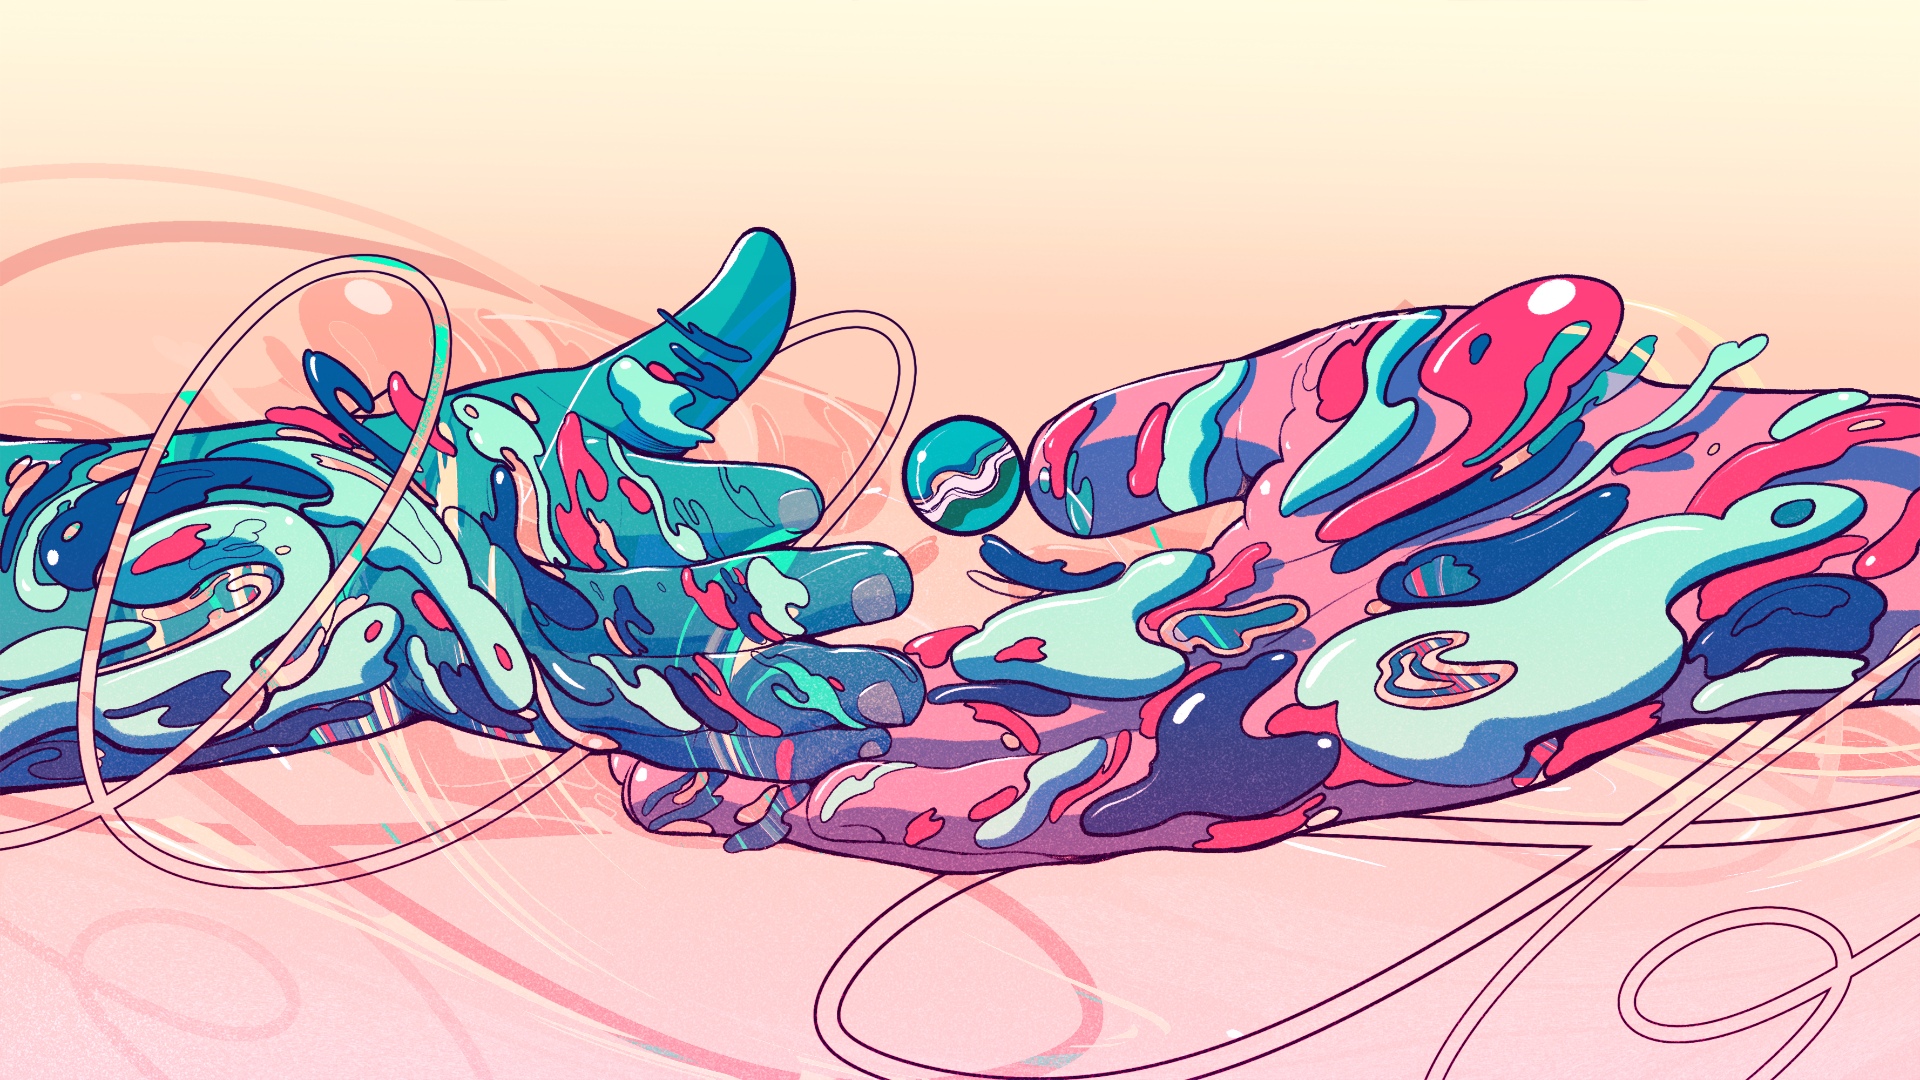 Abstract illustration of two hands made of swirling blue and pink colors, with a small blue and white marble suspended above them